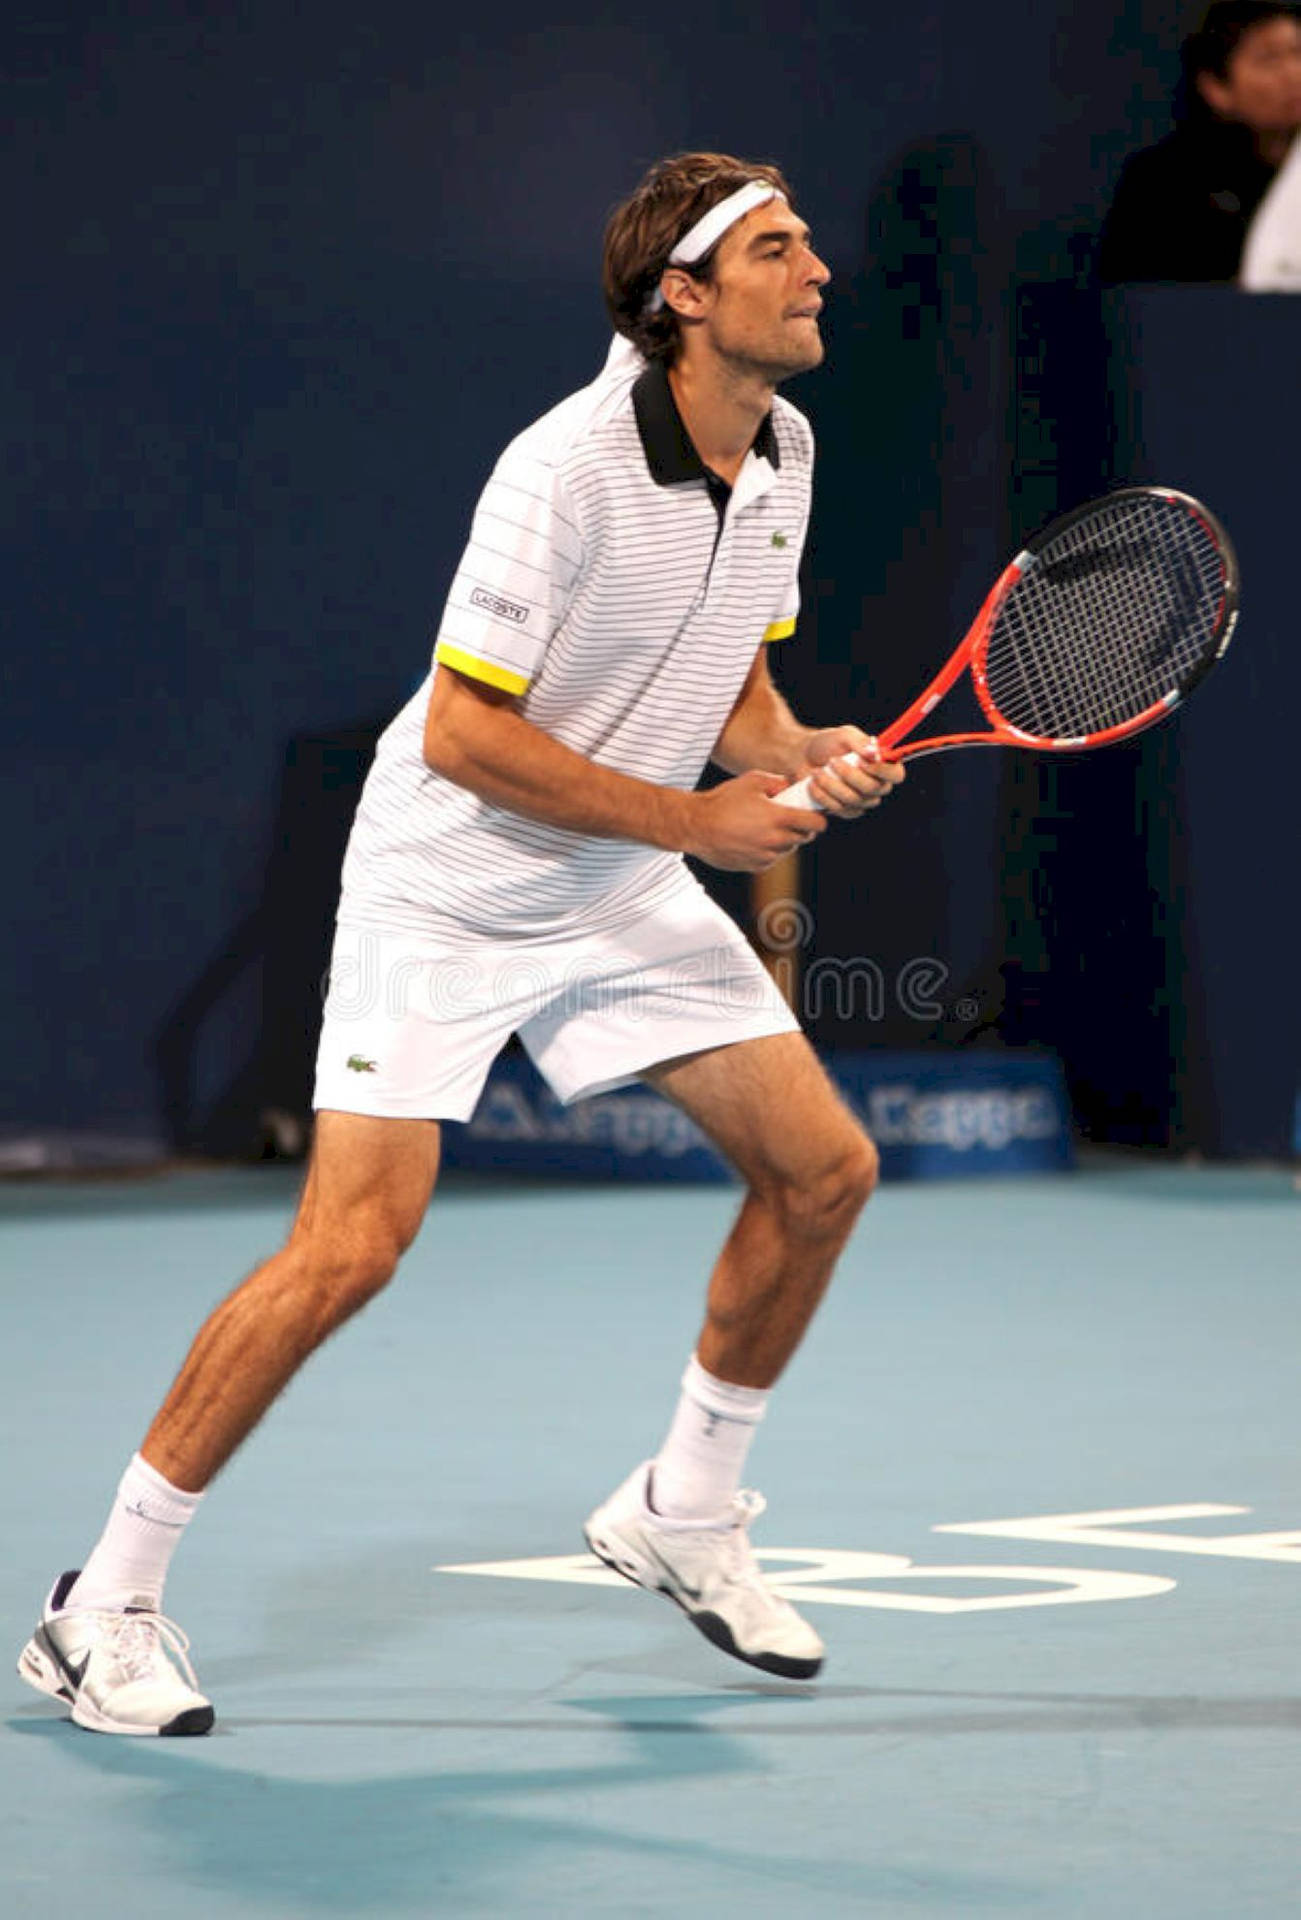 Jeremy Chardy playing a powerful forehand in a professional tennis match Wallpaper